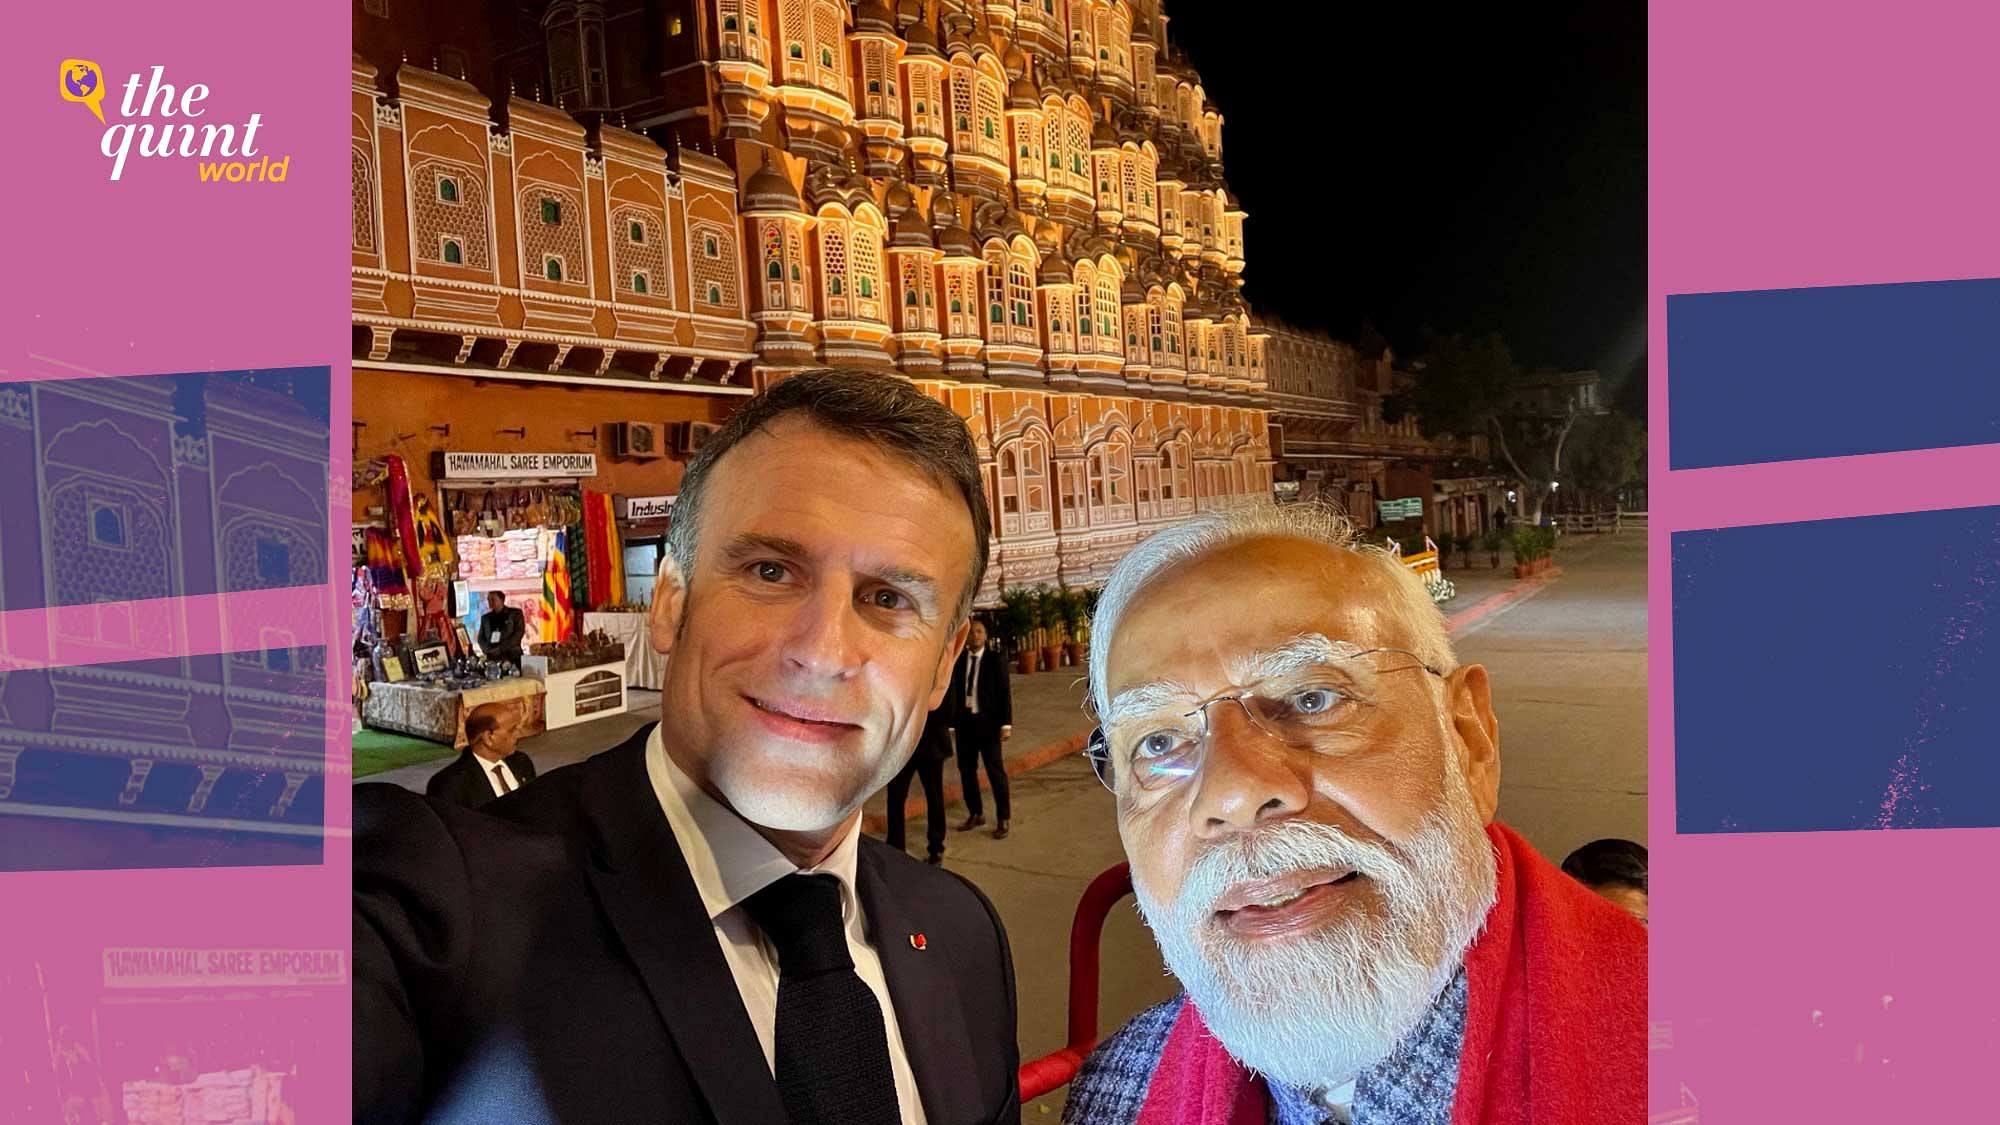 <div class="paragraphs"><p>On Friday, 26 January, Macron shared on the social media platform X (formerly Twitter) to encourage Indian students to study in France and further strengthen the two countries' relations.</p></div>